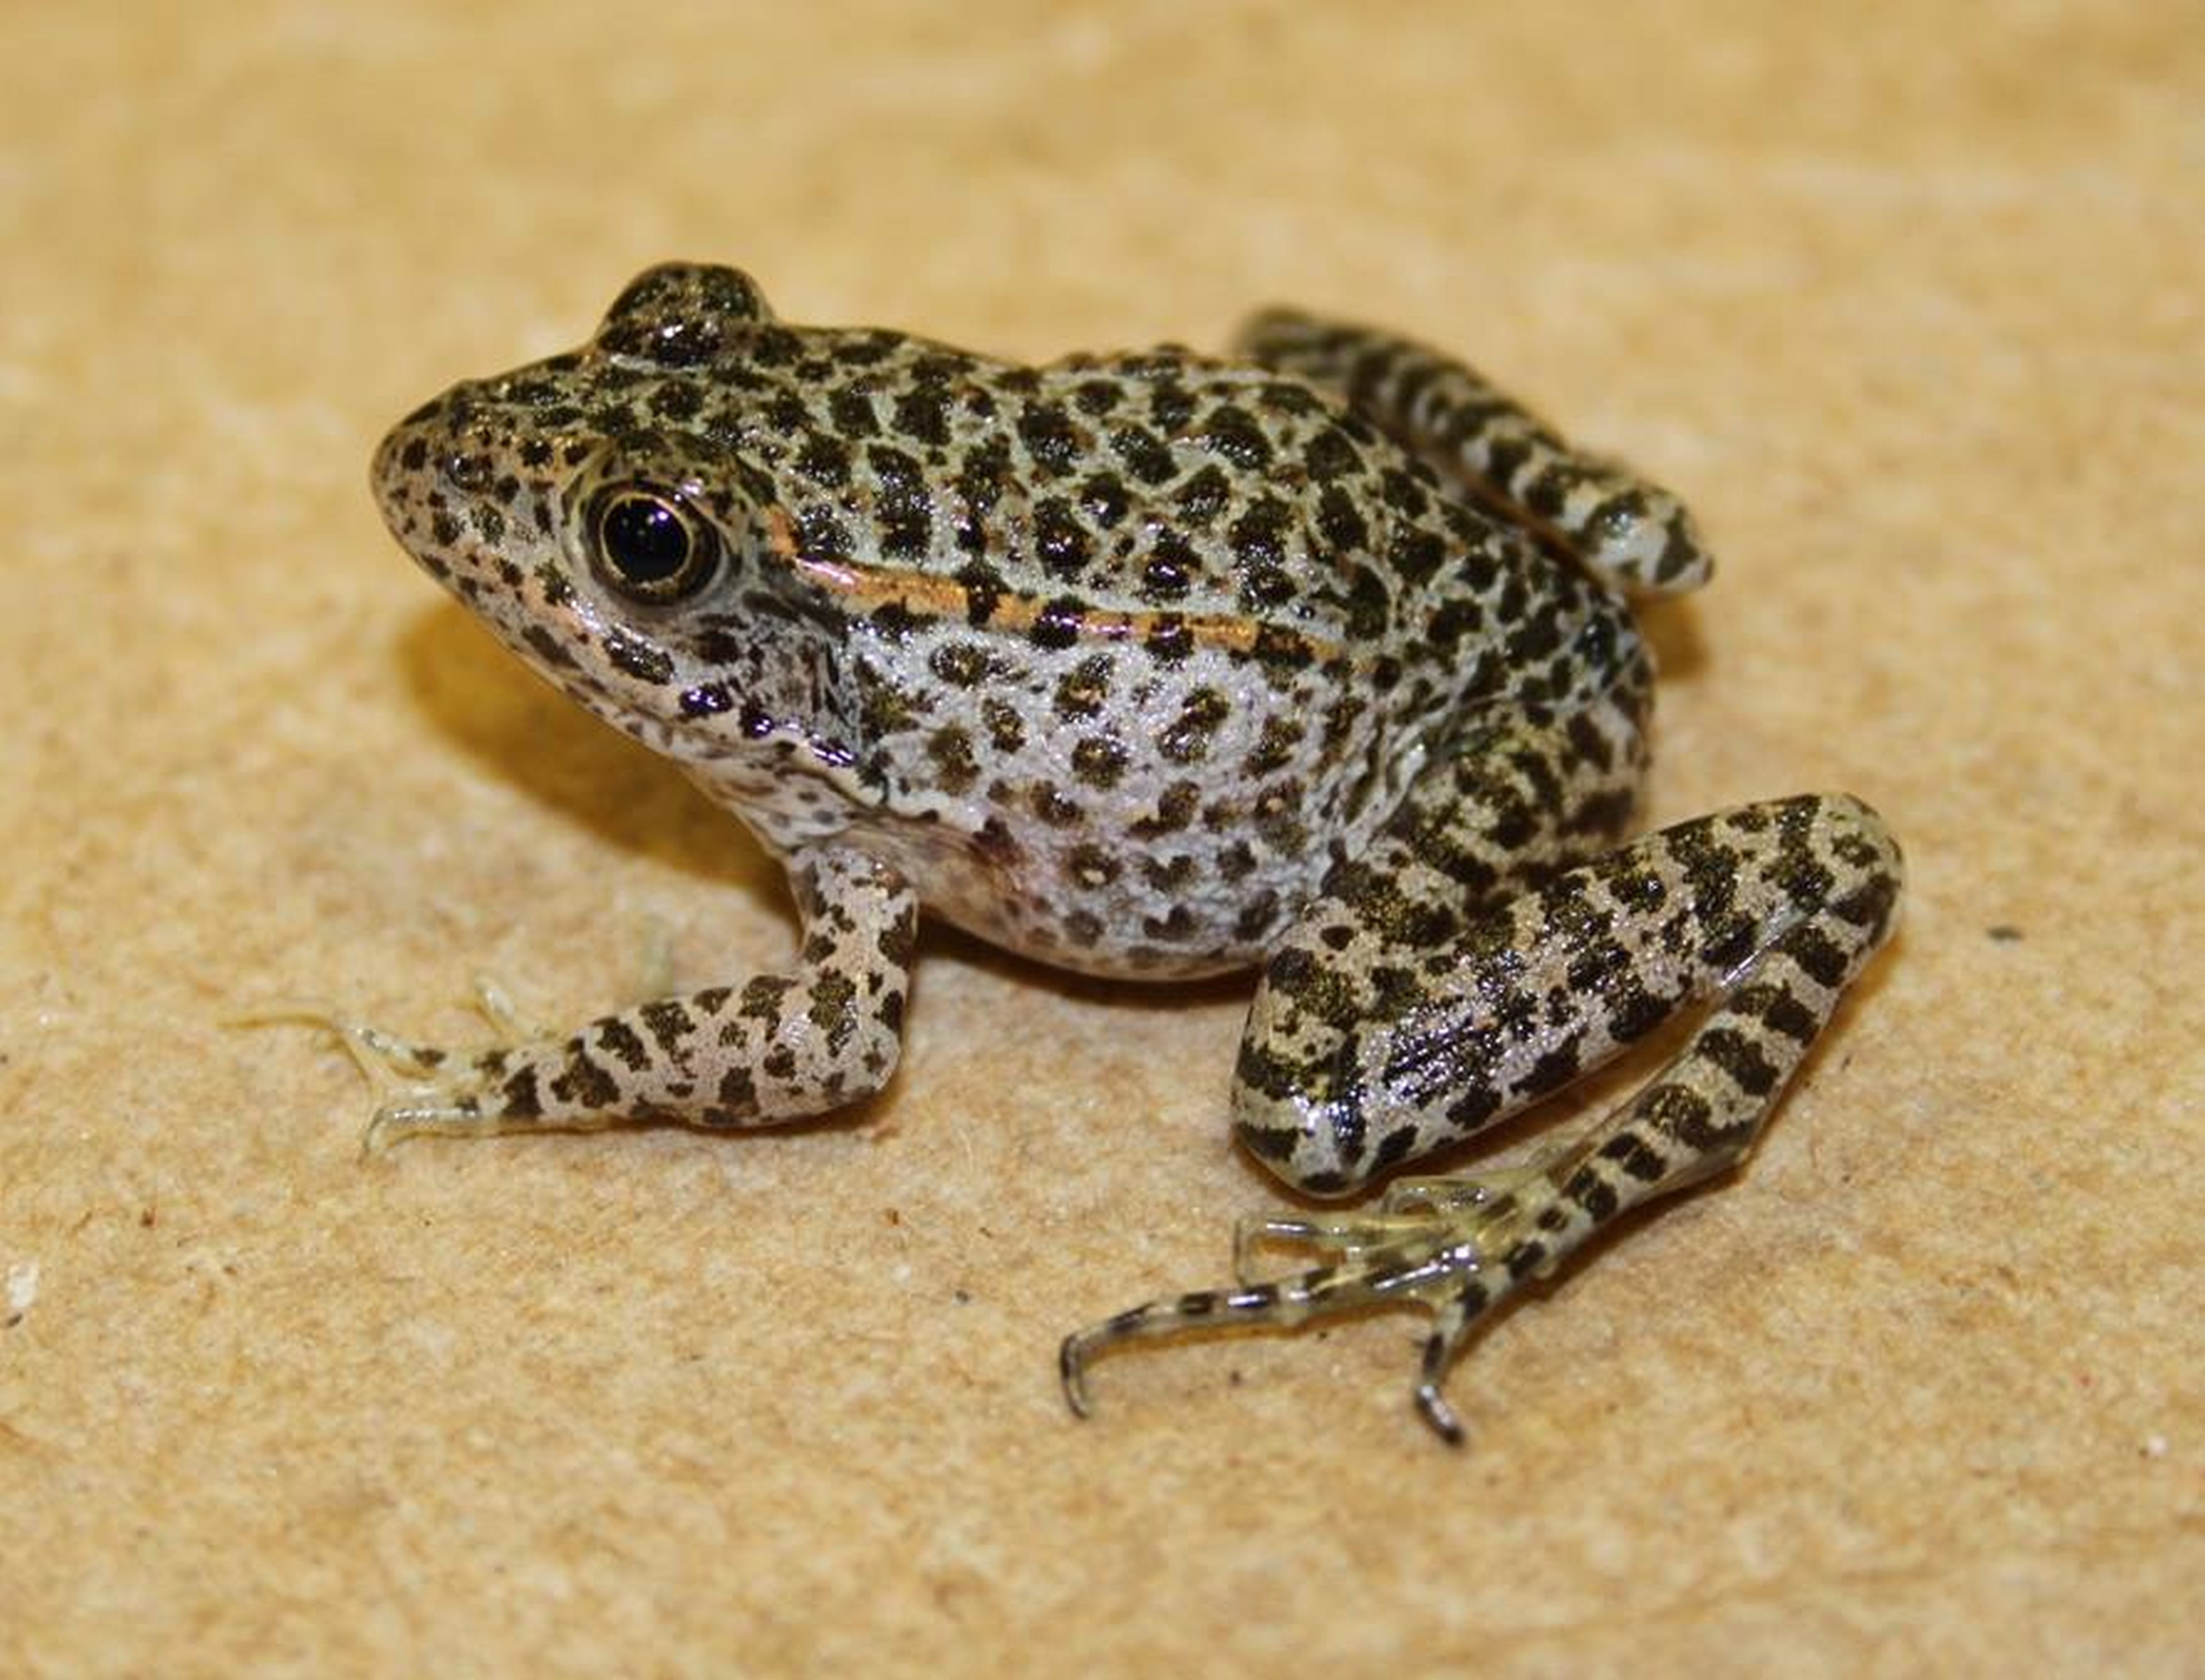 A critically endangered dusky gopher frog, a medium-sized grayish frog covered in dark spots